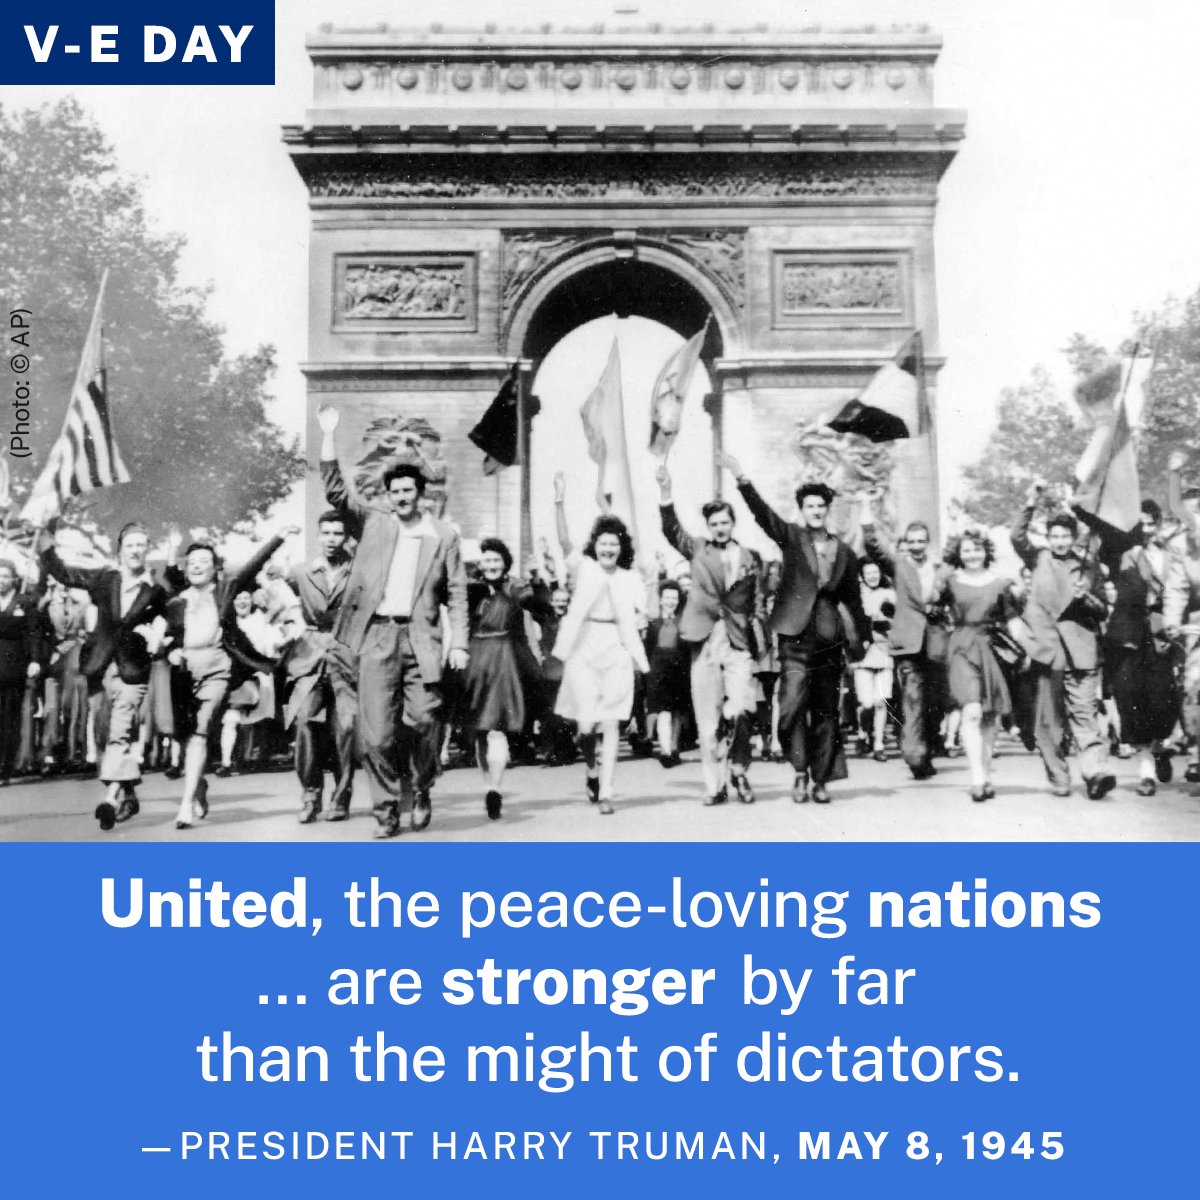 On this Victory in Europe Day #VEDay, and every day, we honor the 🇺🇸 and Allied soldiers who fought to defend the shared values of freedom, human rights & the rule of law. #NATO was created 75 years ago to uphold these values while maintaining peace & avoiding future conflicts –